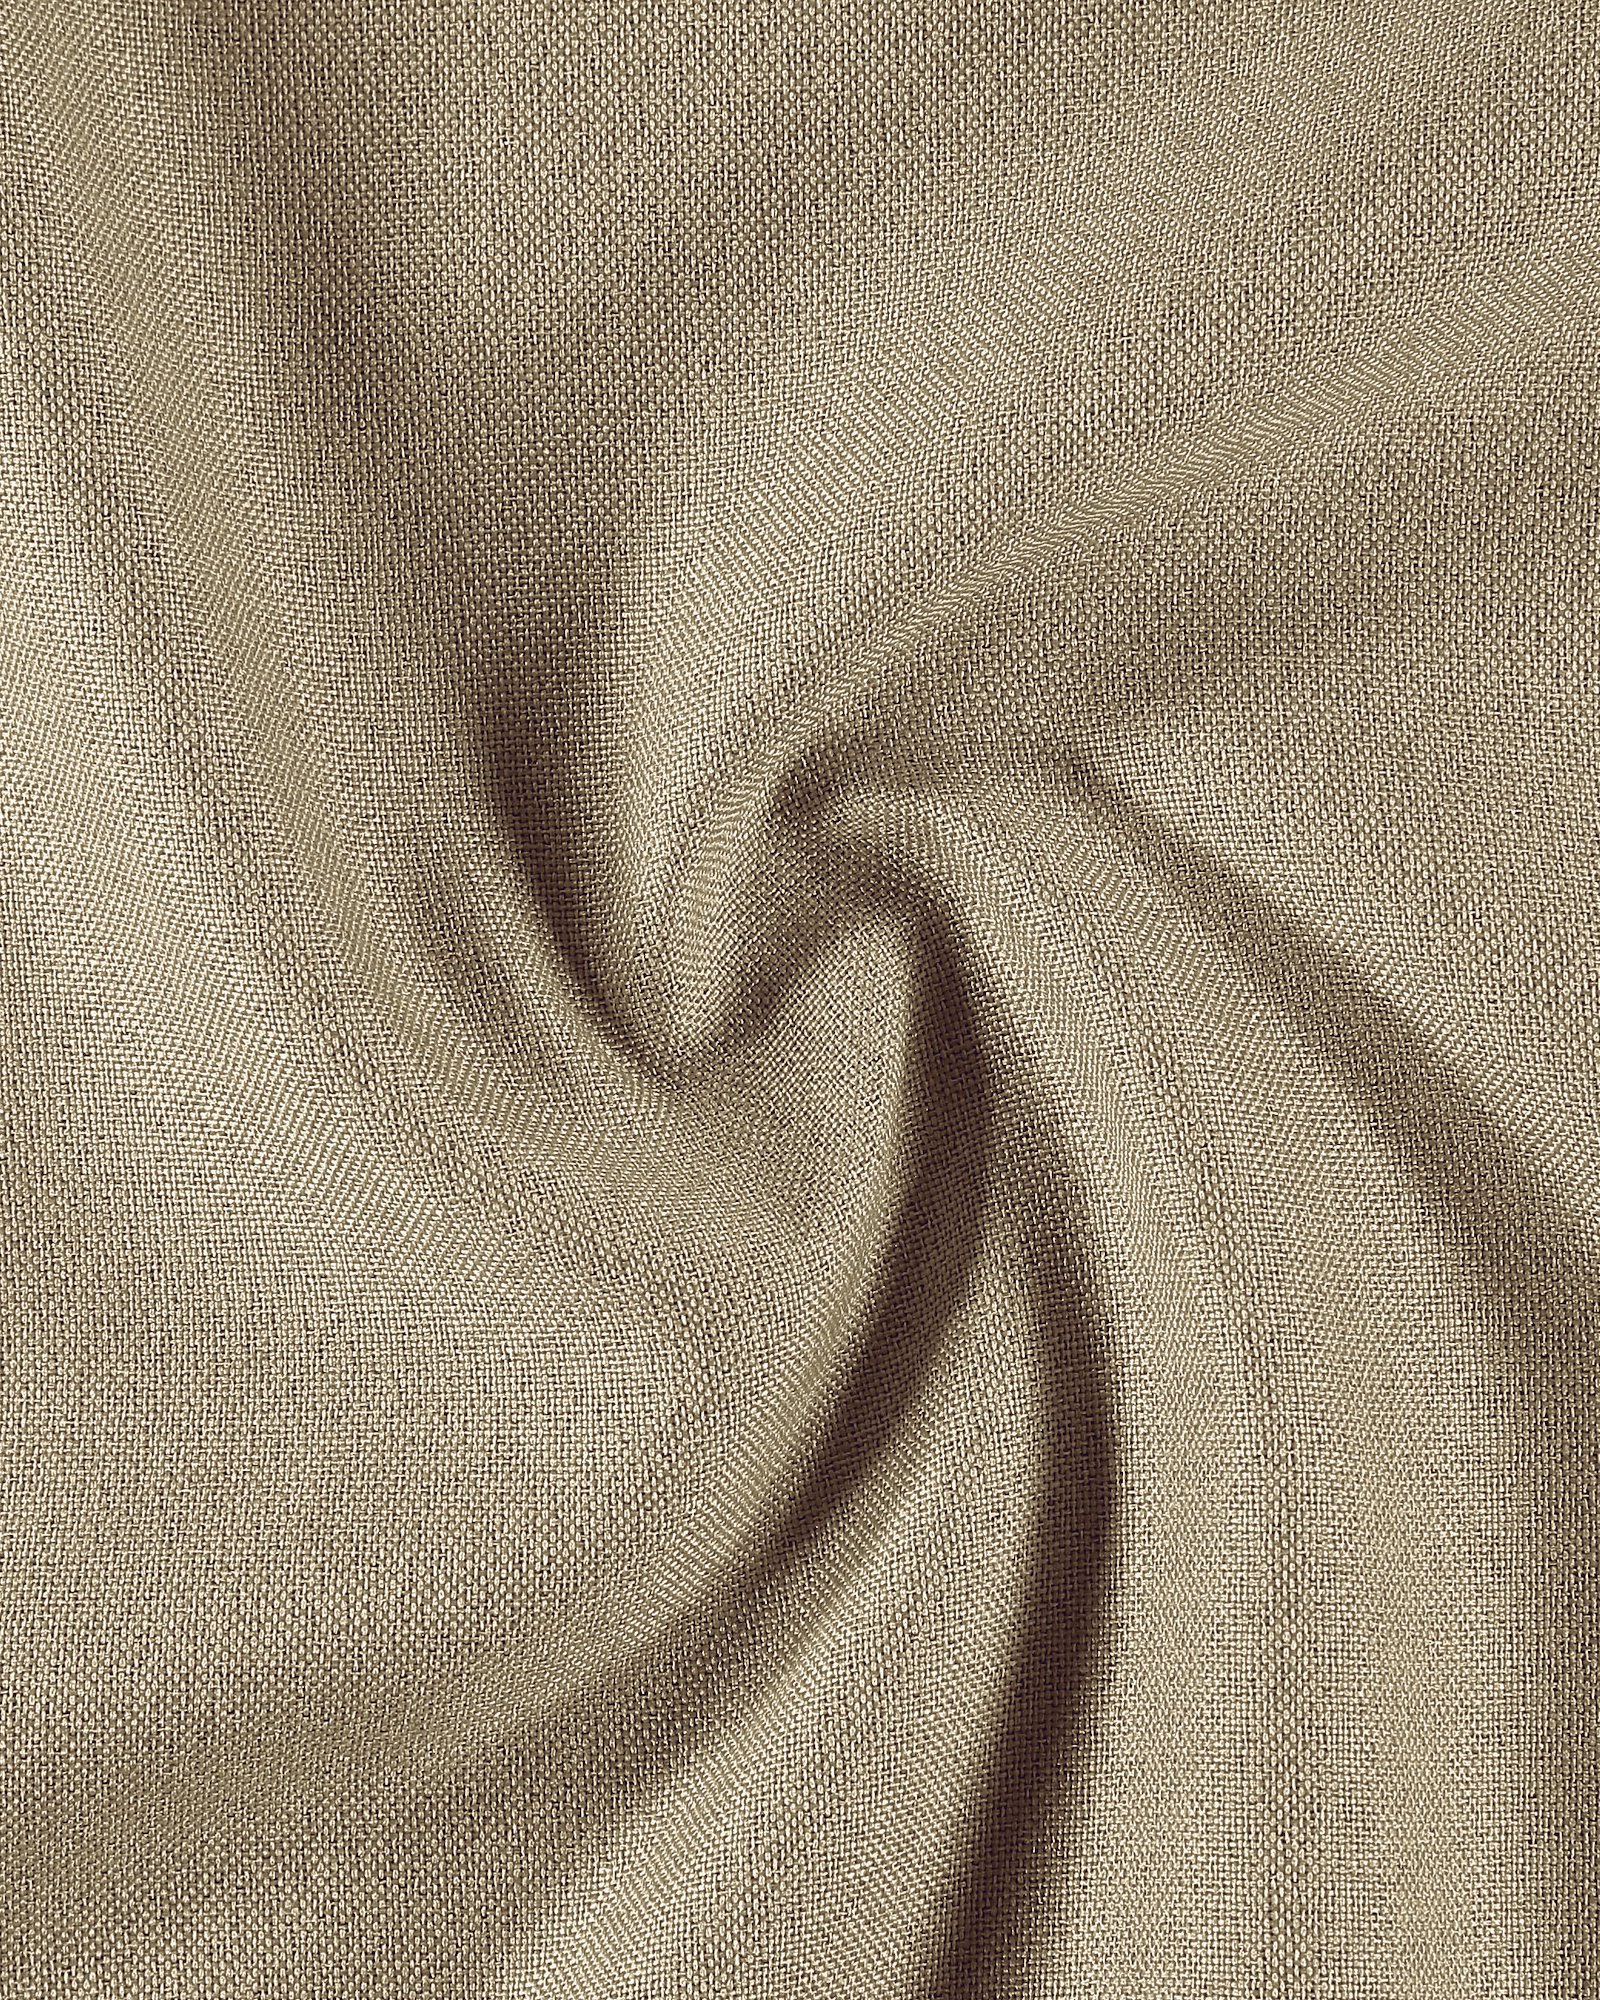 Woven dimout texture sand 815279_pack